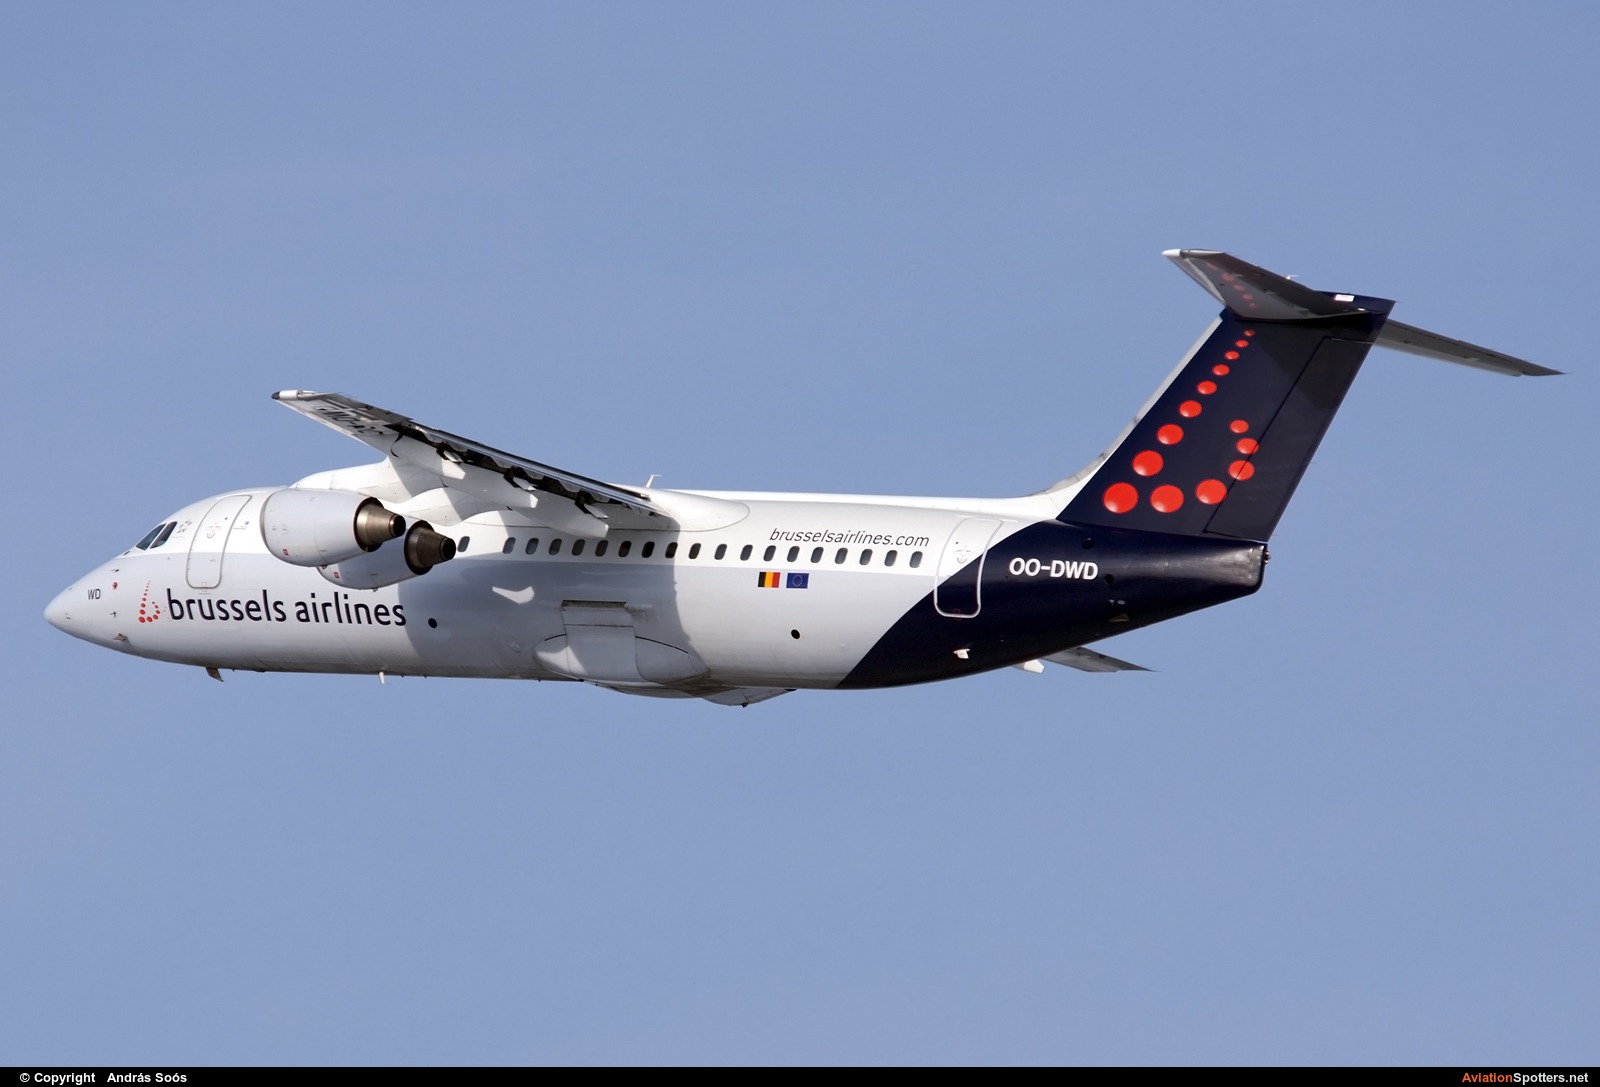 Brussels Airlines  -  BAe 146-300-Avro RJ100  (OO-DWD) By András Soós (sas1965)